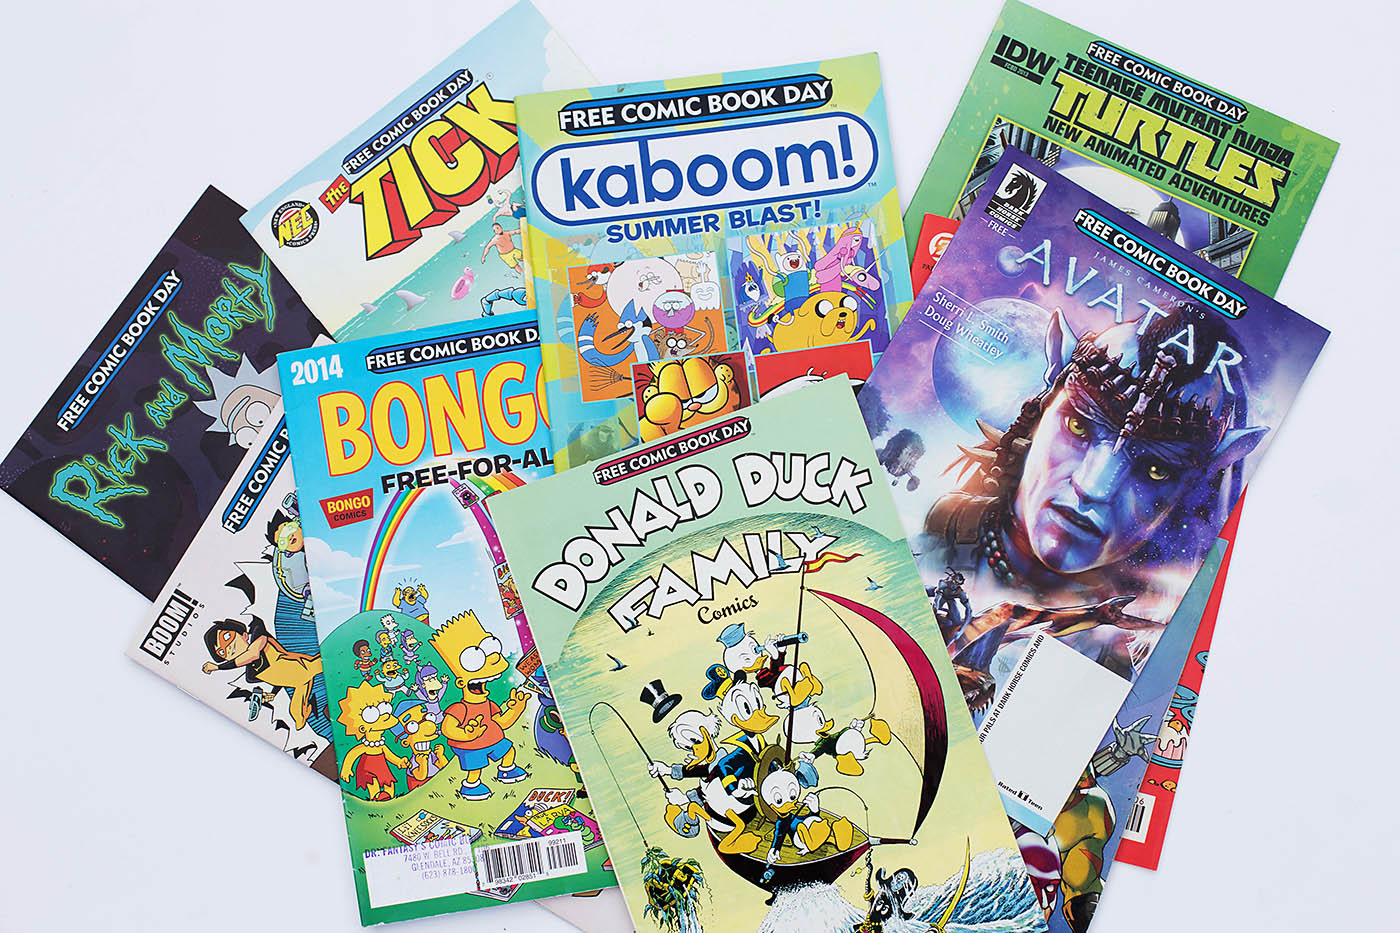 Free Comic Book Day! All the info on how to participate and what comics will be free